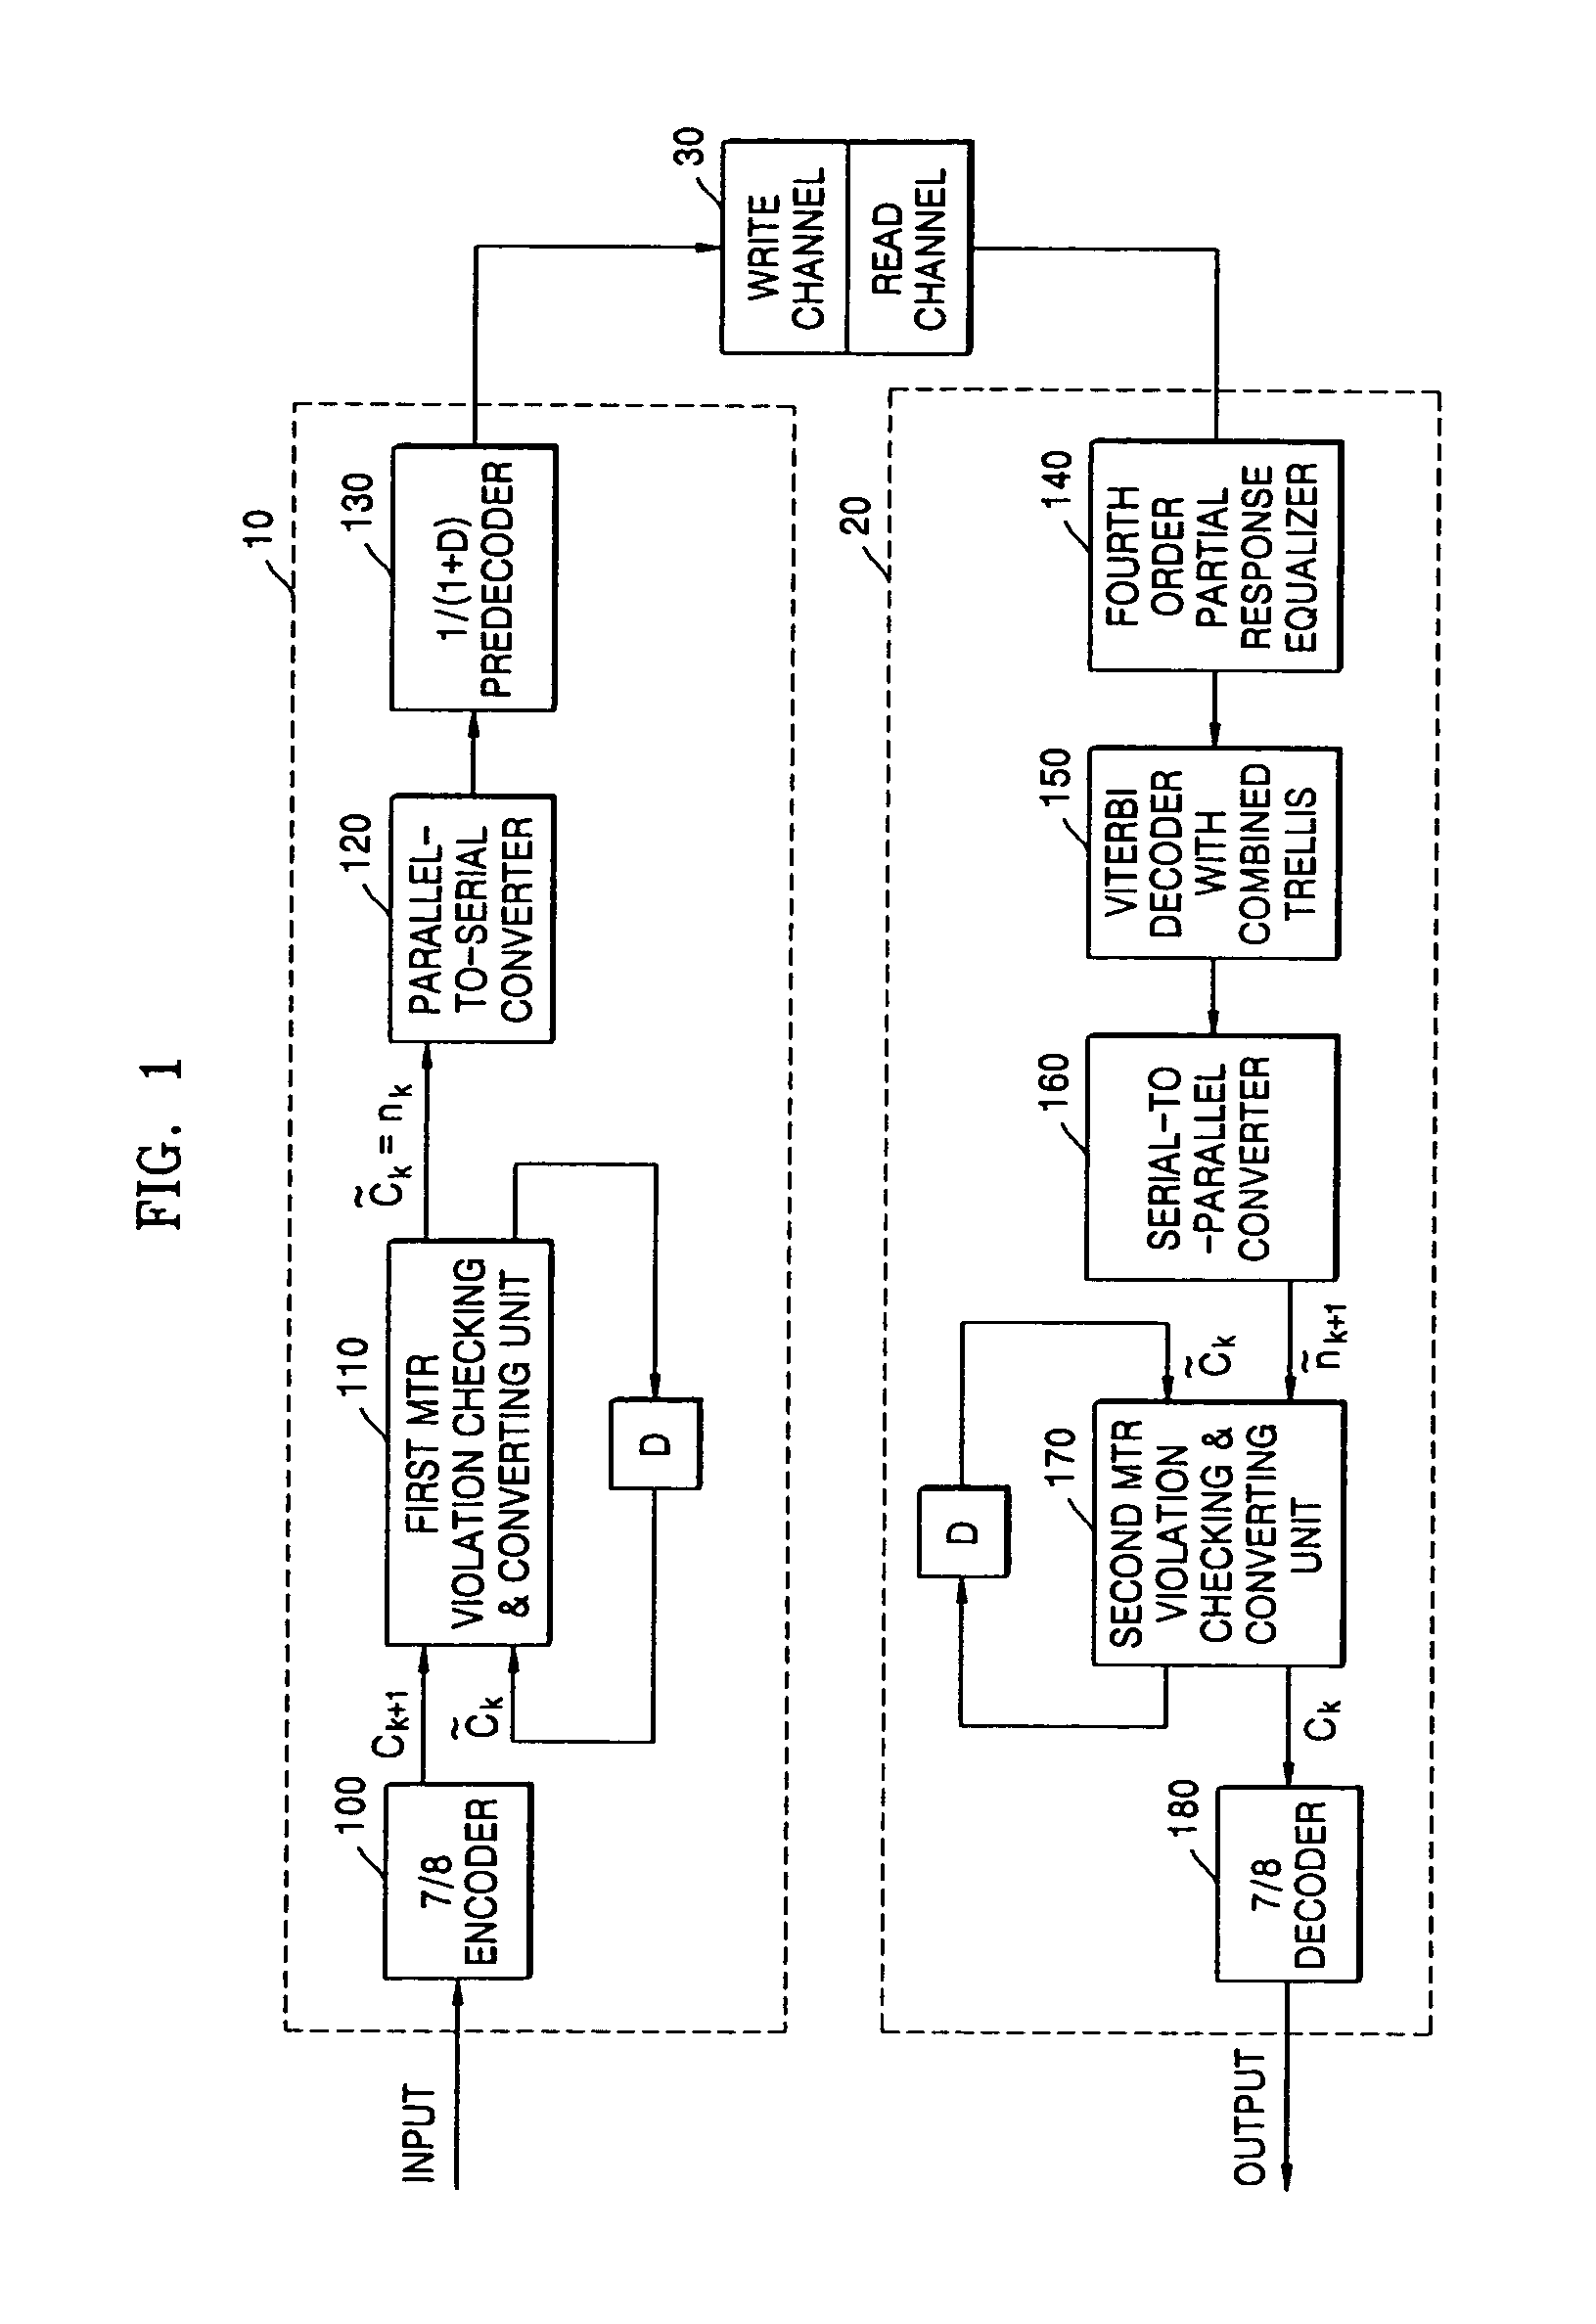 Rate-7/8 maximum transition run code encoding and decoding method and apparatus